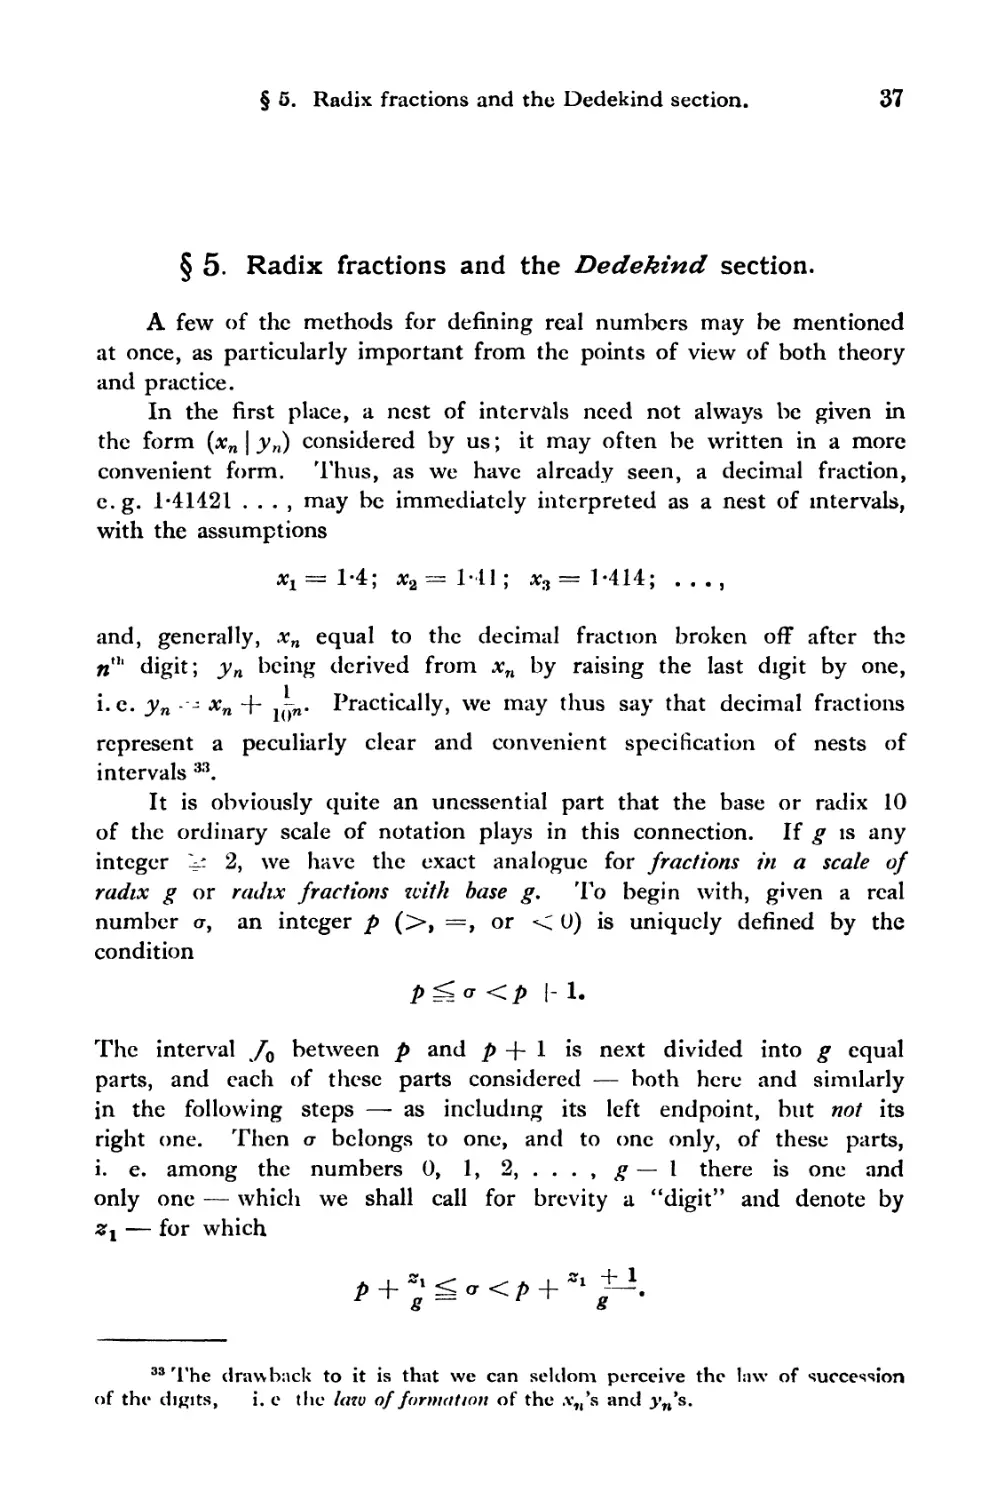 § 5. Radix fractions and the Dedekind section